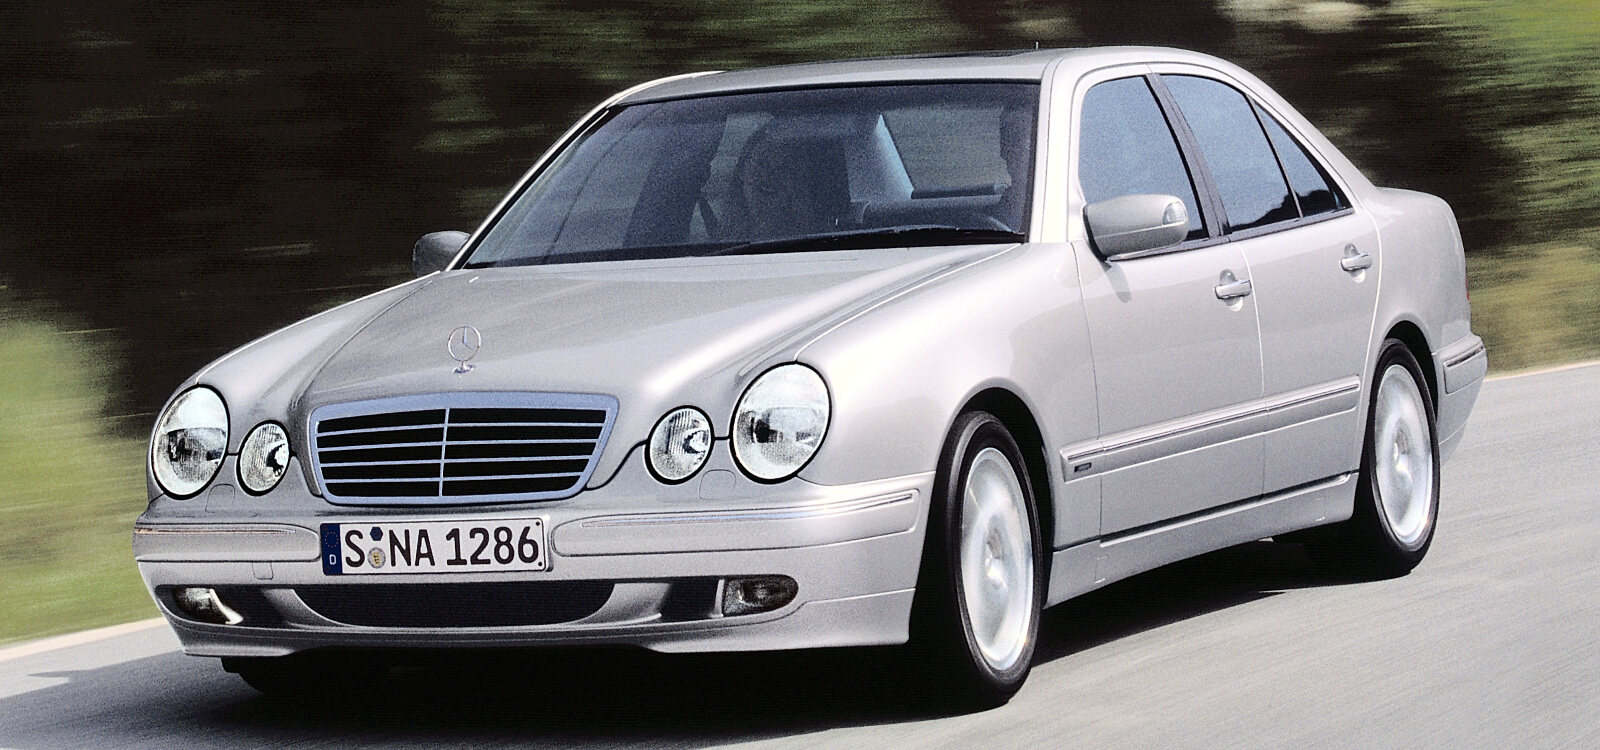 PKW4060000000 E-Class Saloons and predecessors